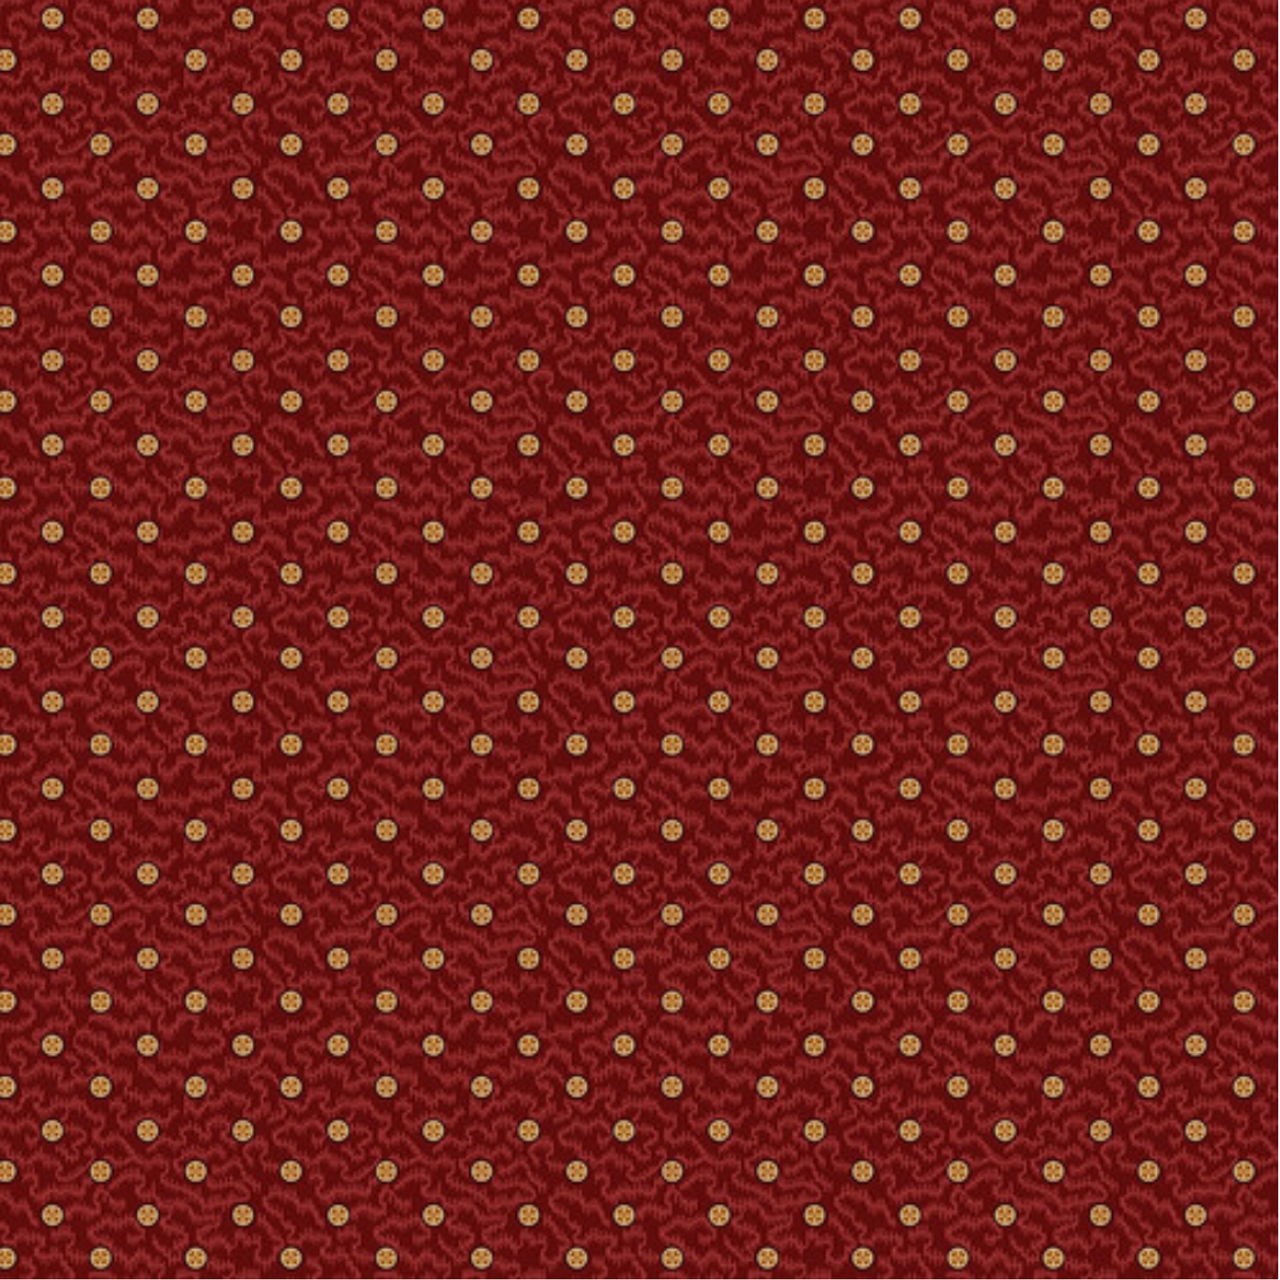 Henry Glass Autumn Spice Tiny Wheels Red Cotton Fabric By The Yard